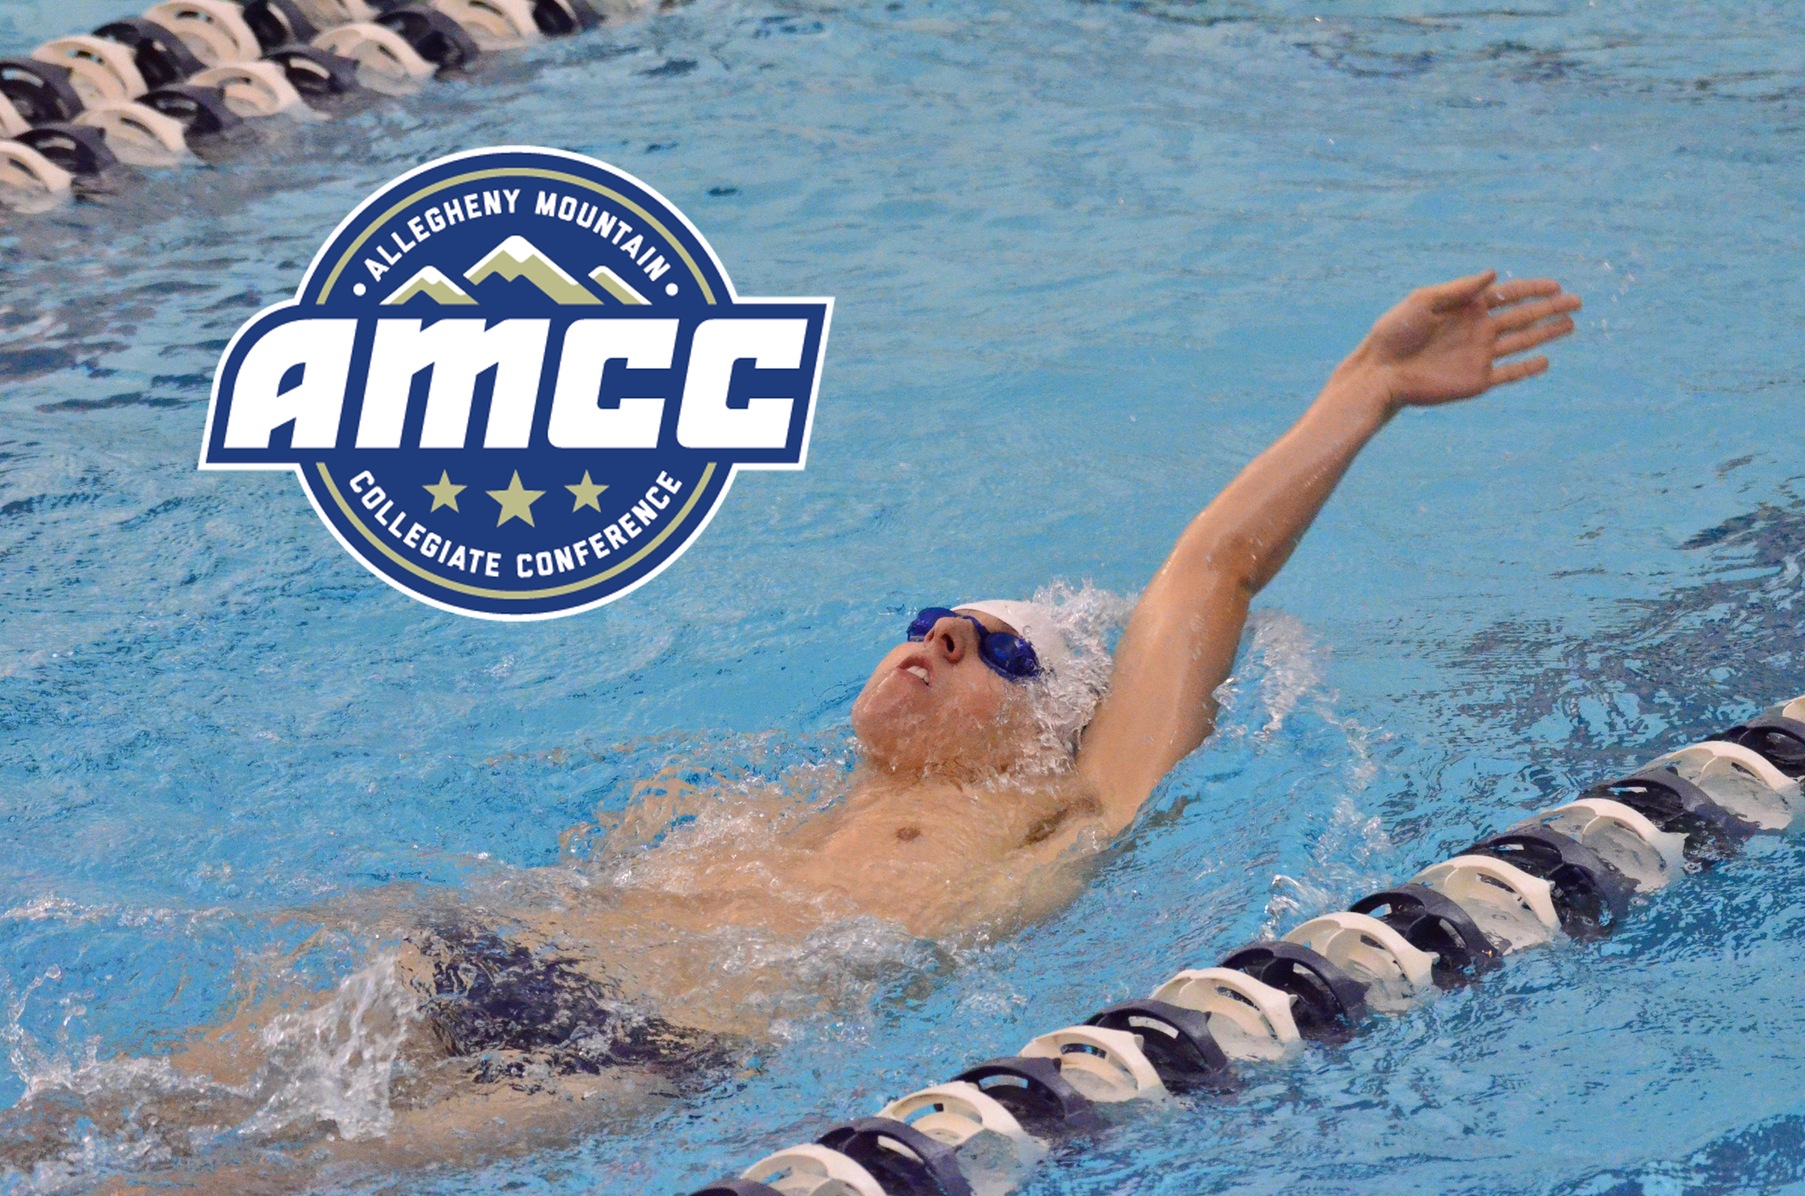 Patterson Selected AMCC Athlete of the Week